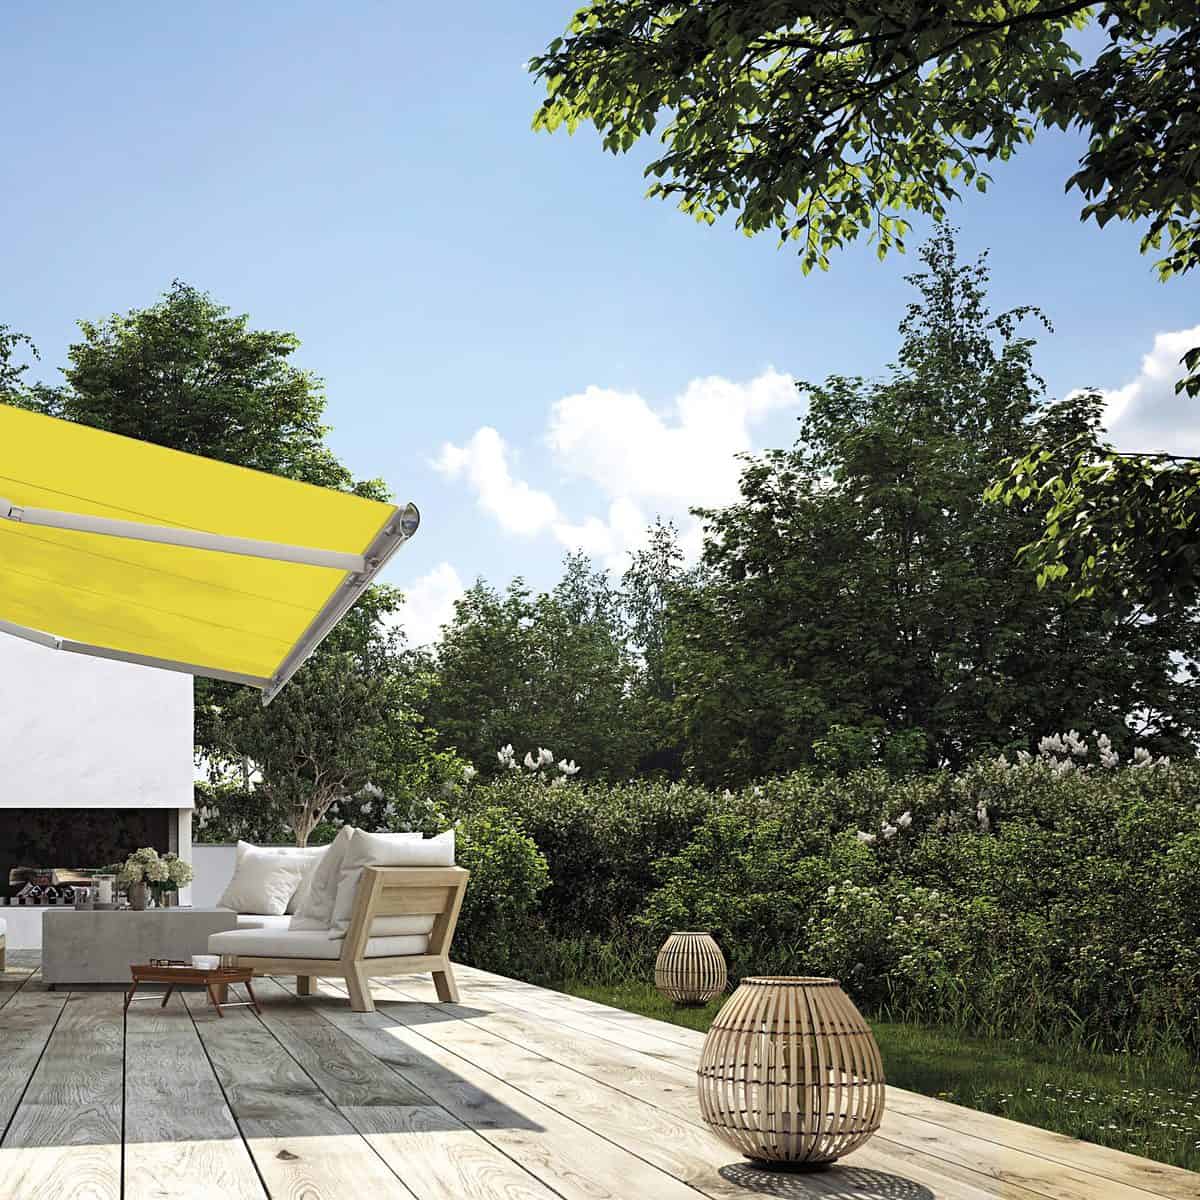 markilux 6000 in bright yellow, over 250 fabric options to choose from